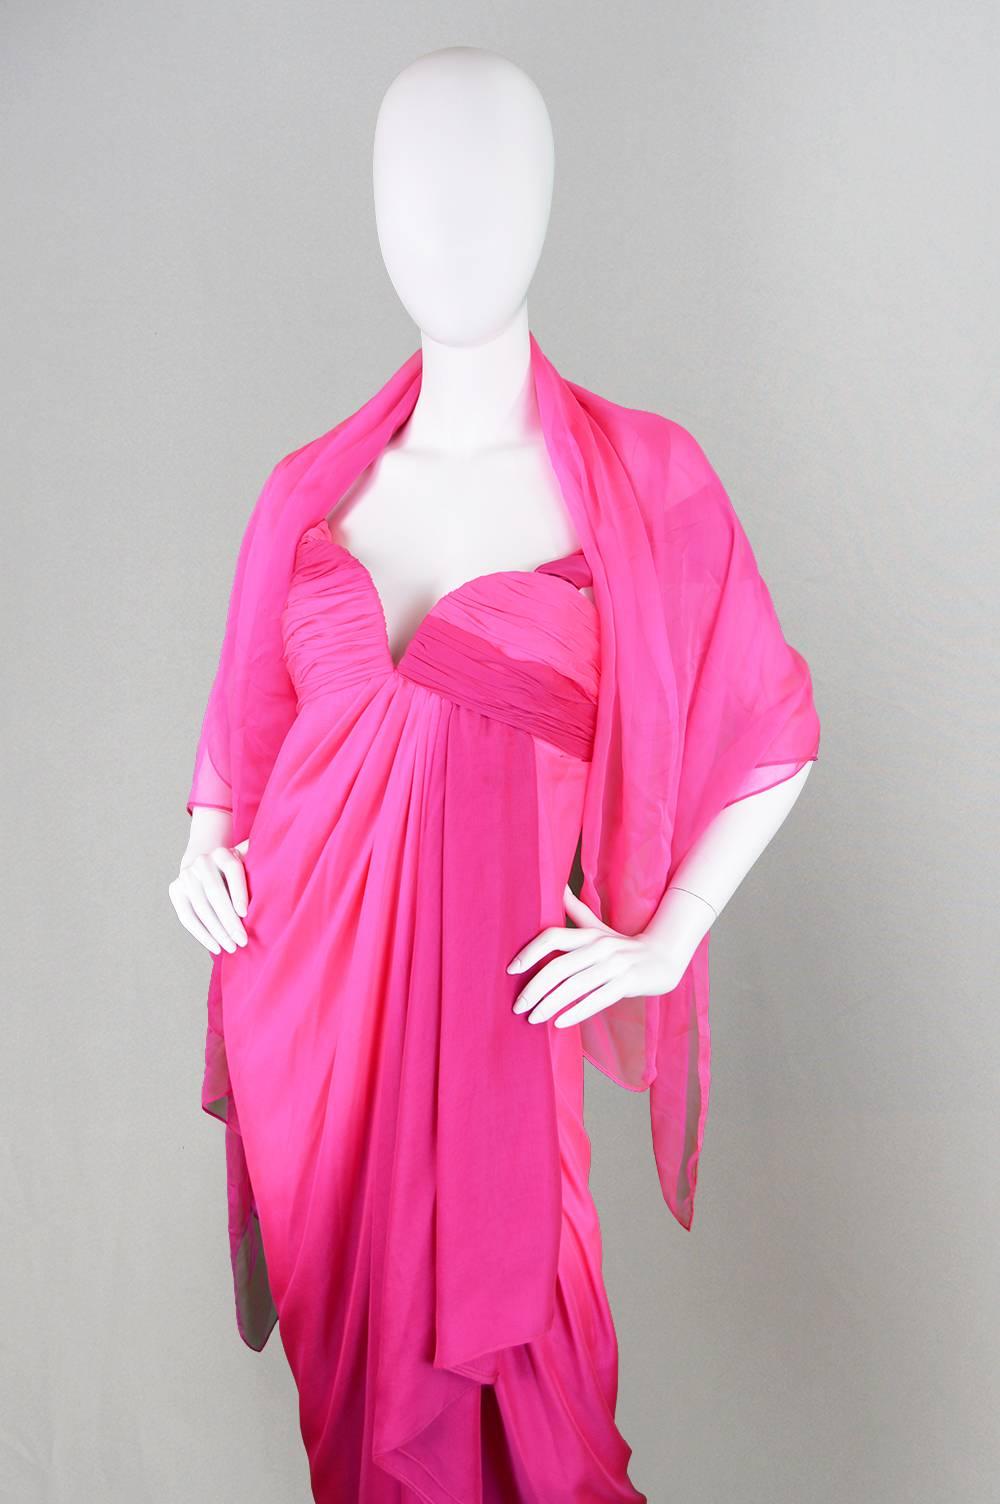 An absolutely breathtaking vintage dress from the 1980s by Andrea Odicini for his couture line. Truly the perfect fit for a red carpet or the most elegant evening event, the layers of hot pink silk chiffon swathe around the feminine form like a